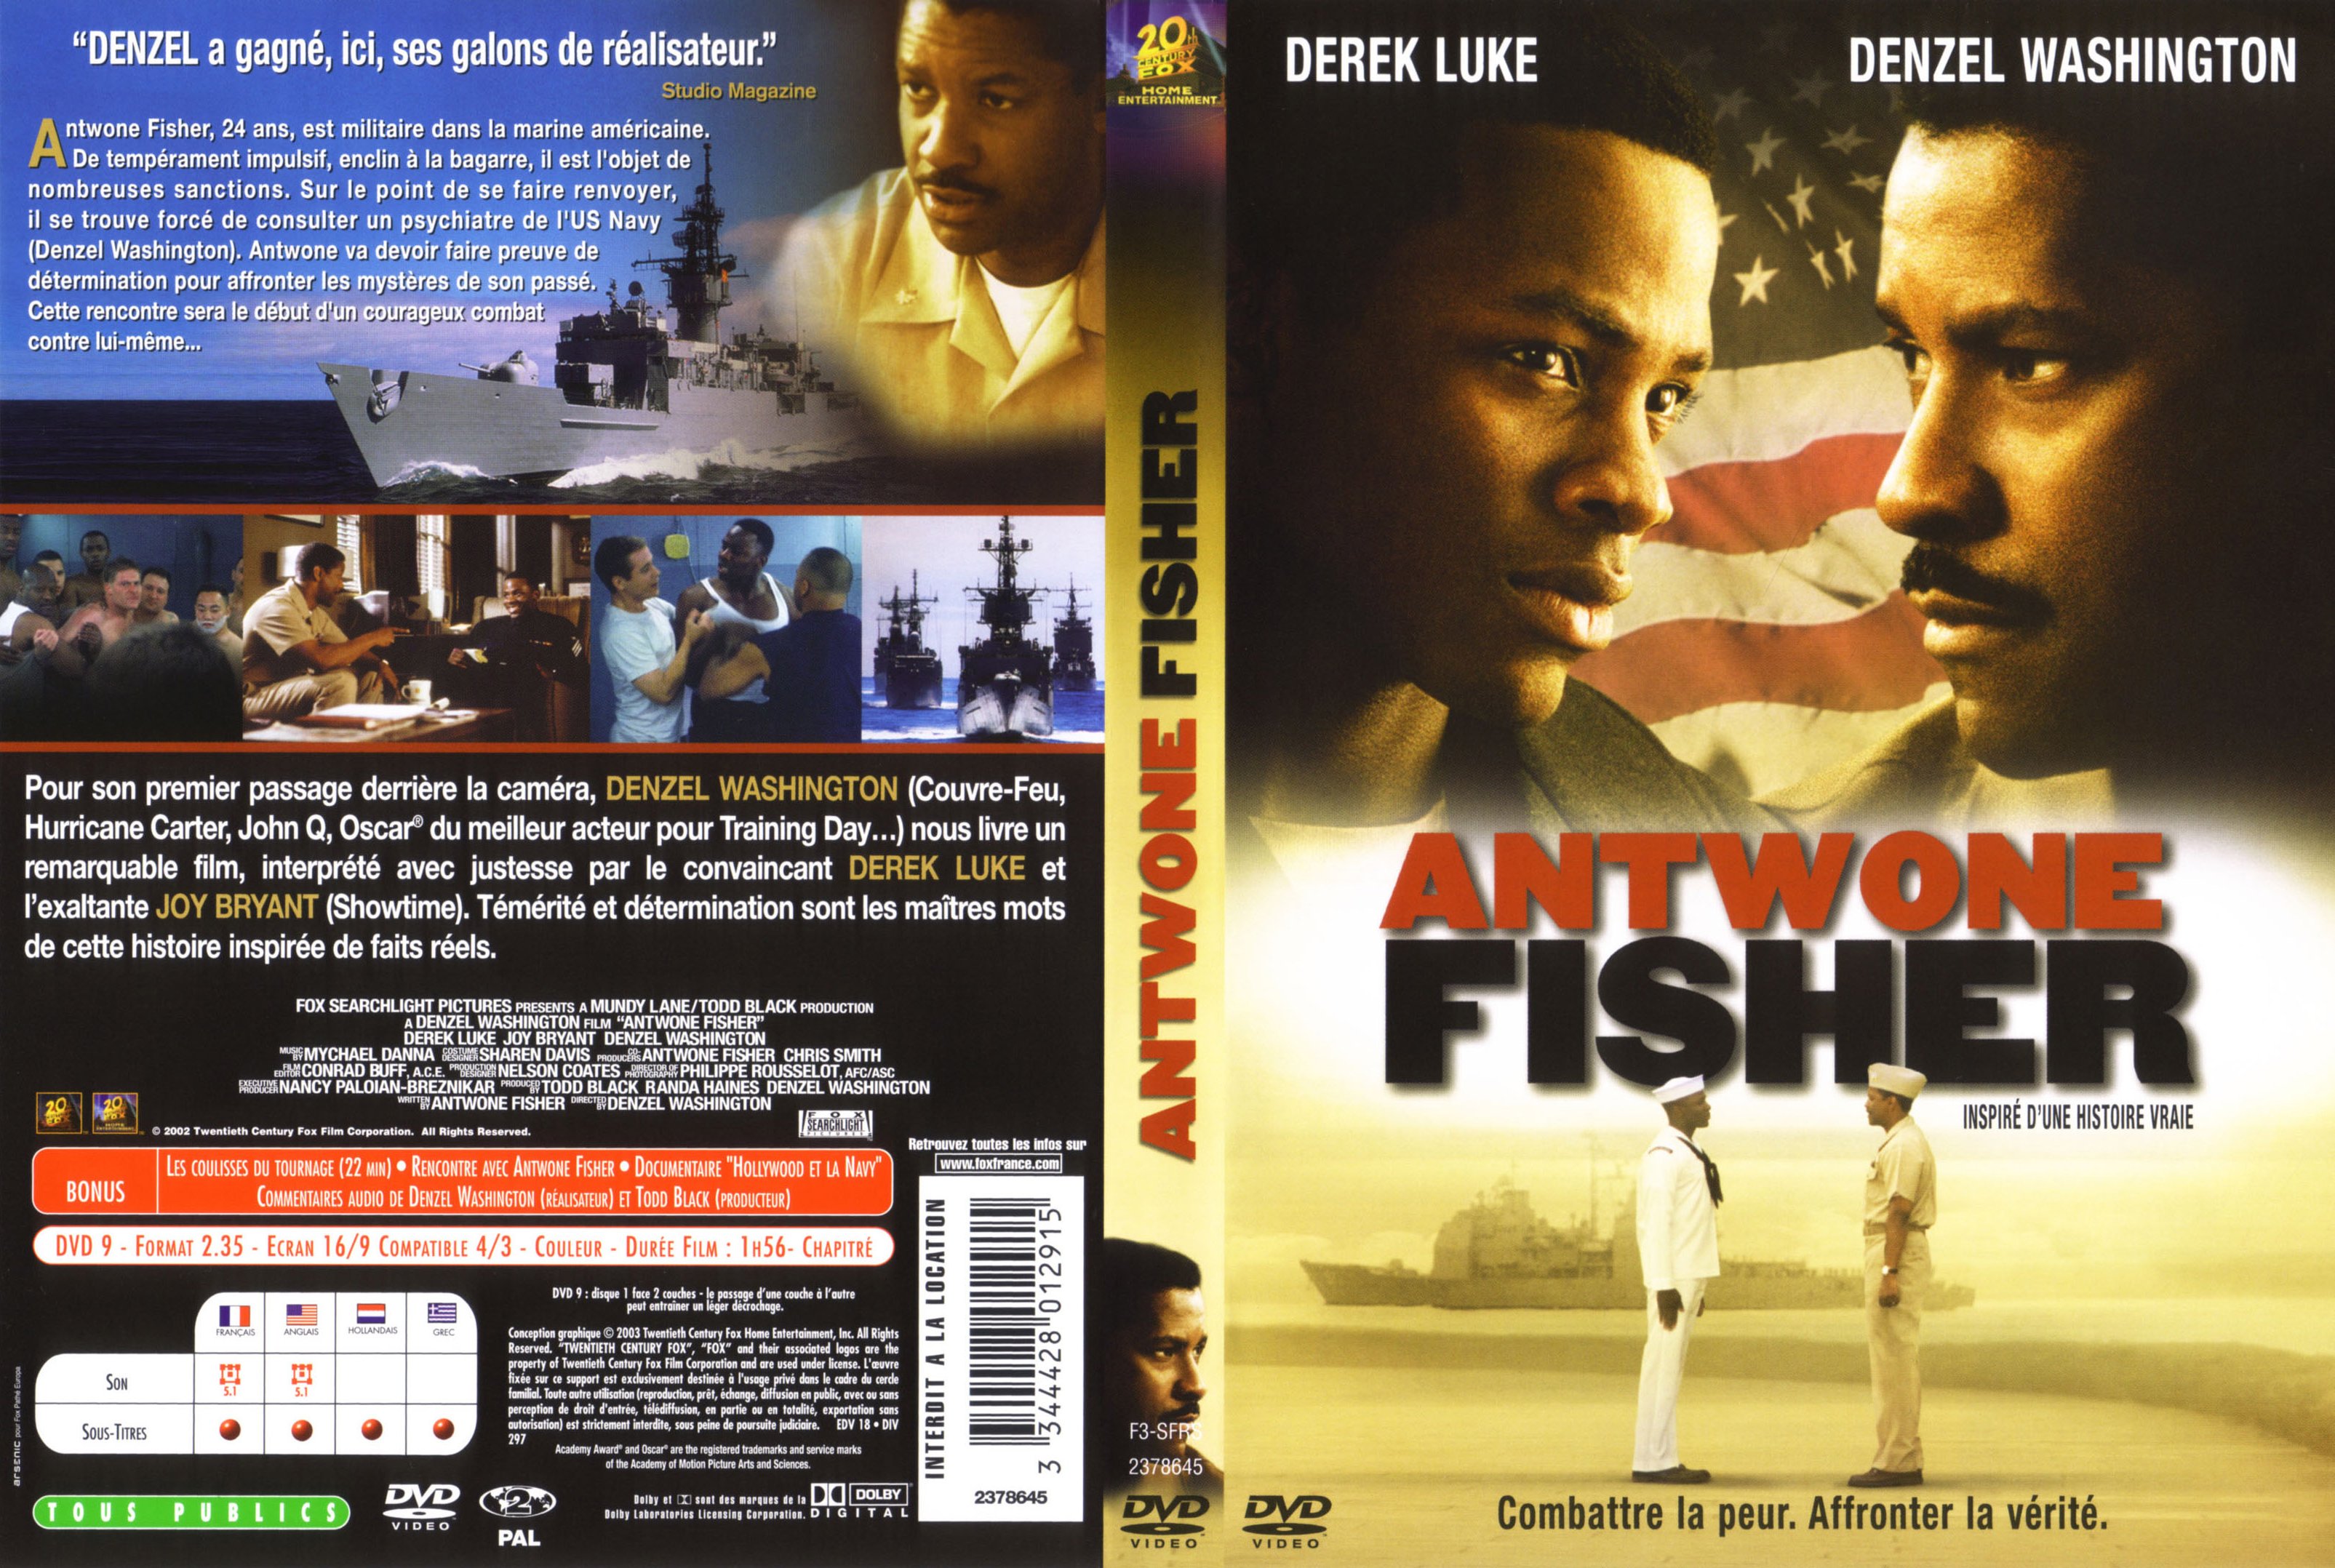 Jaquette DVD Antwone Fisher